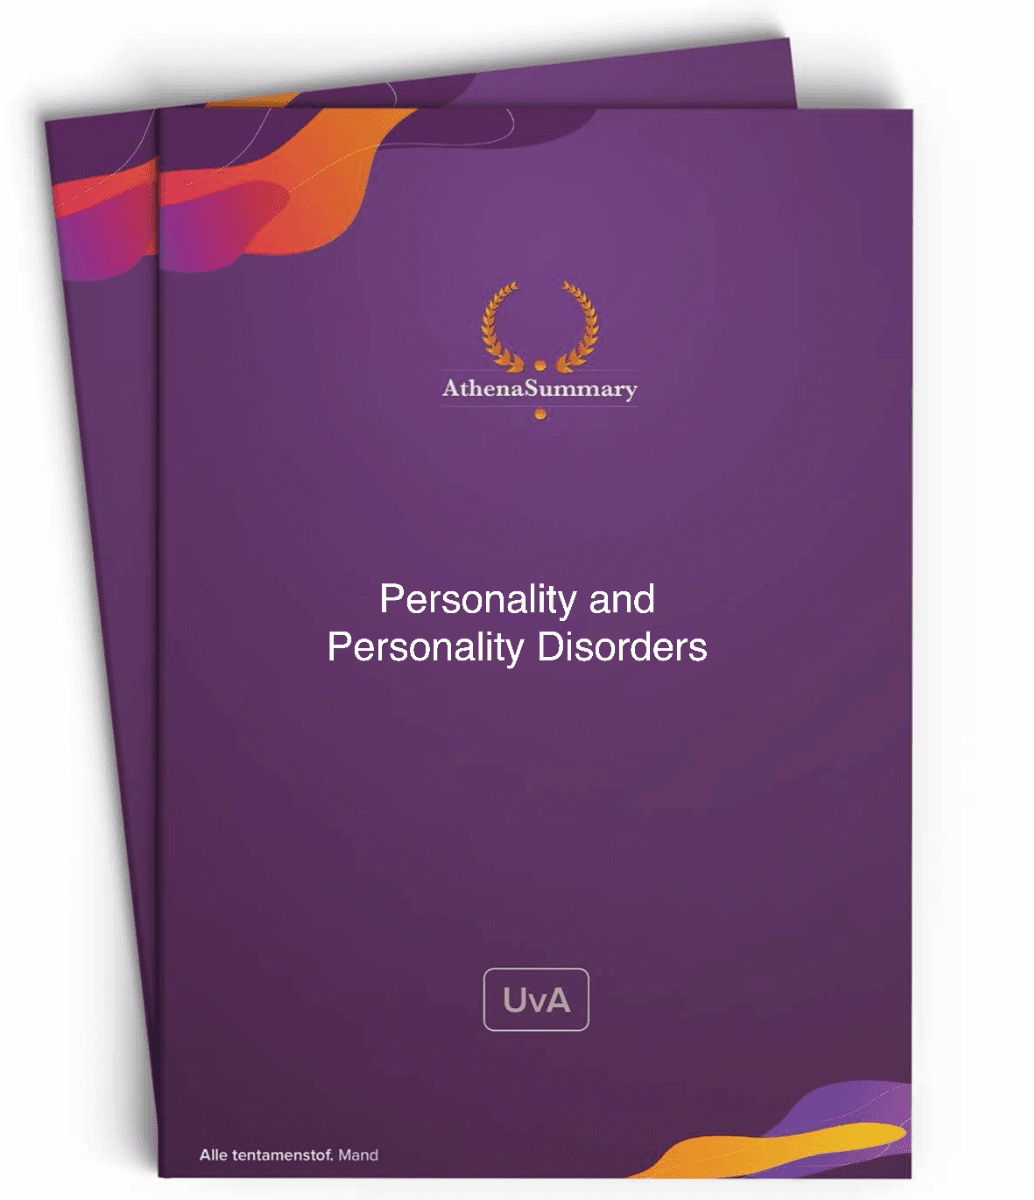 Literature Summary: Personality and Personality Disorders